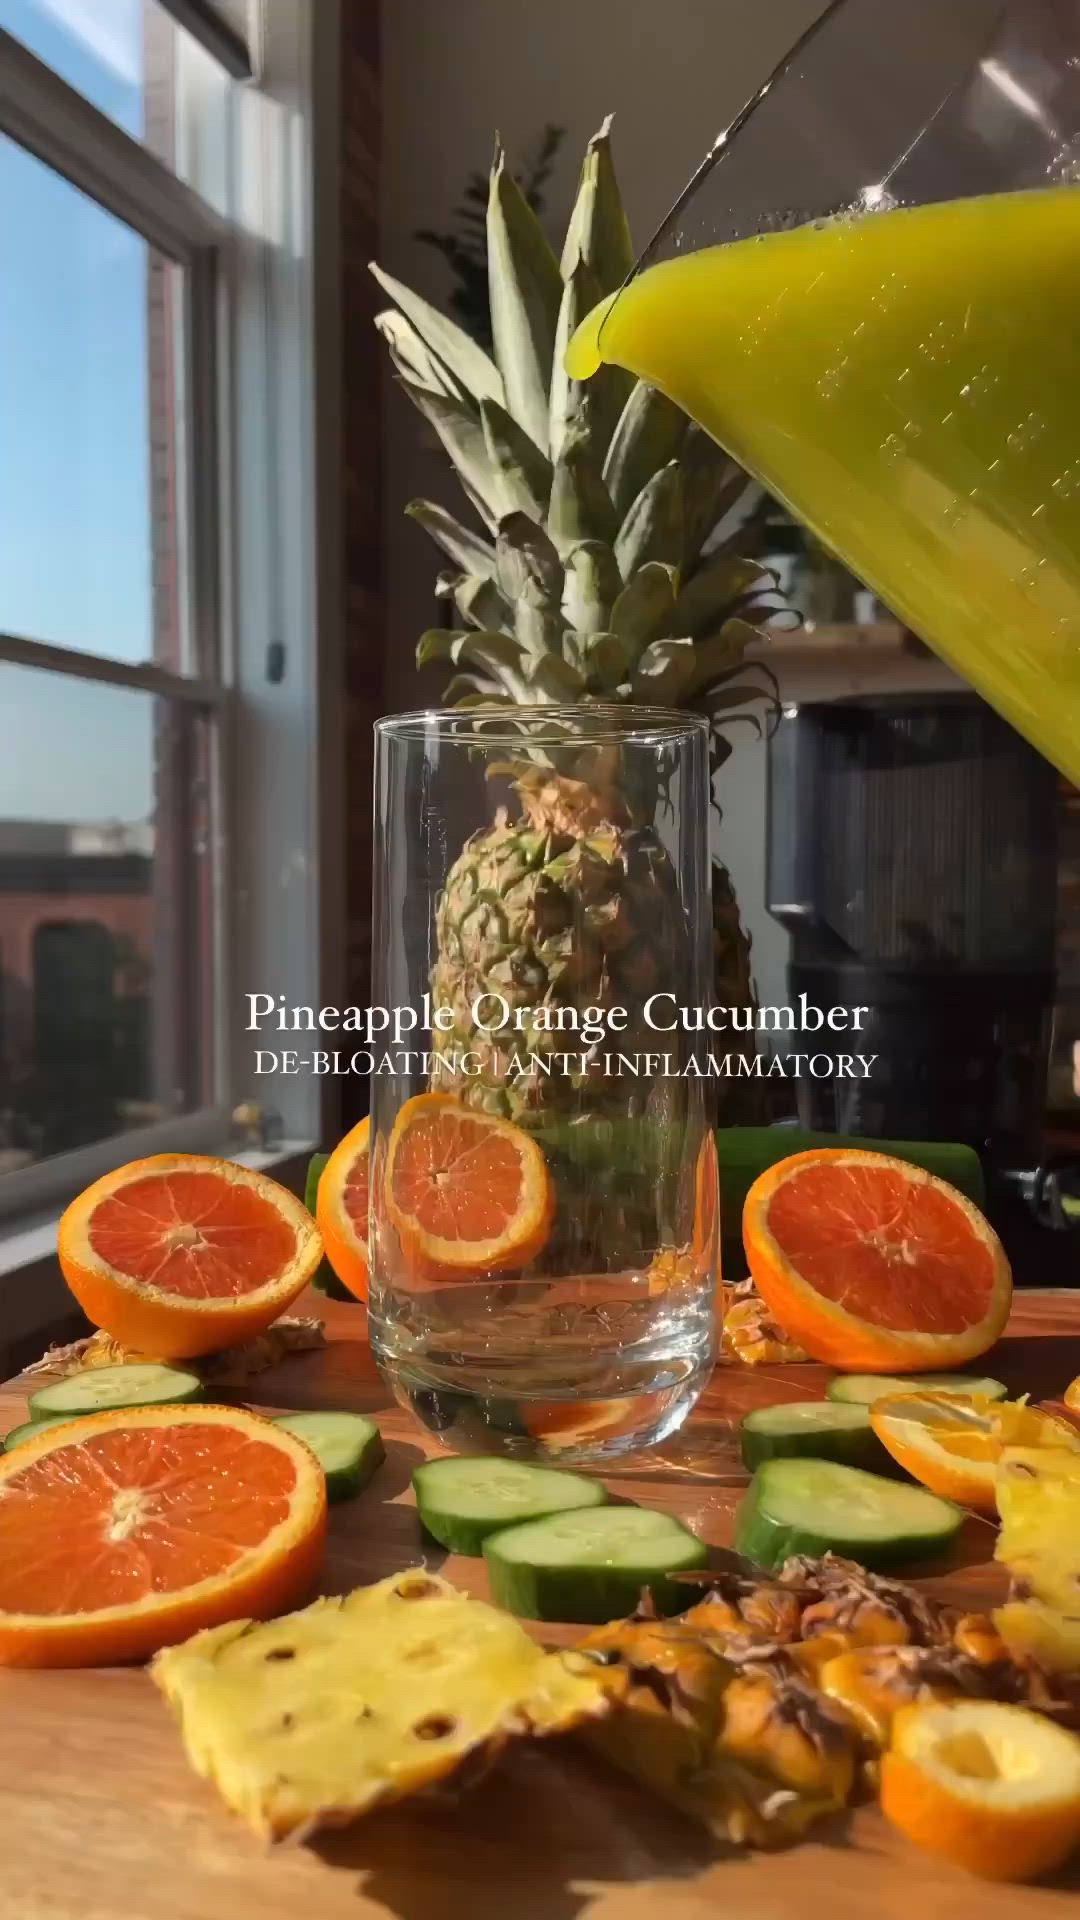 This may contain: a pineapple drink being poured into a glass with sliced oranges and cucumbers